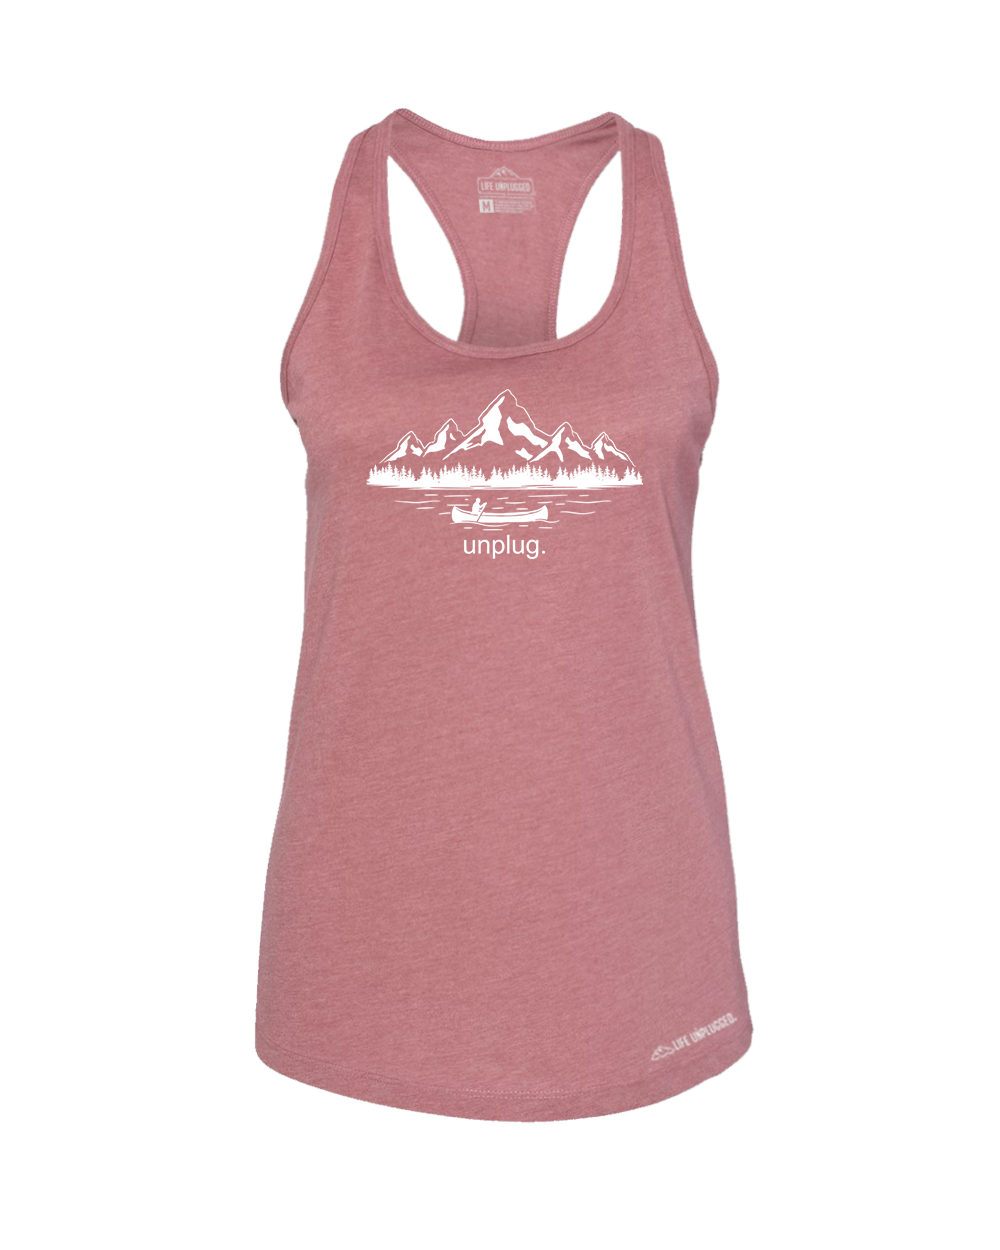 Canoeing In The Mountains Premium Women's Relaxed Fit Racerback Tank Top - Life Unplugged